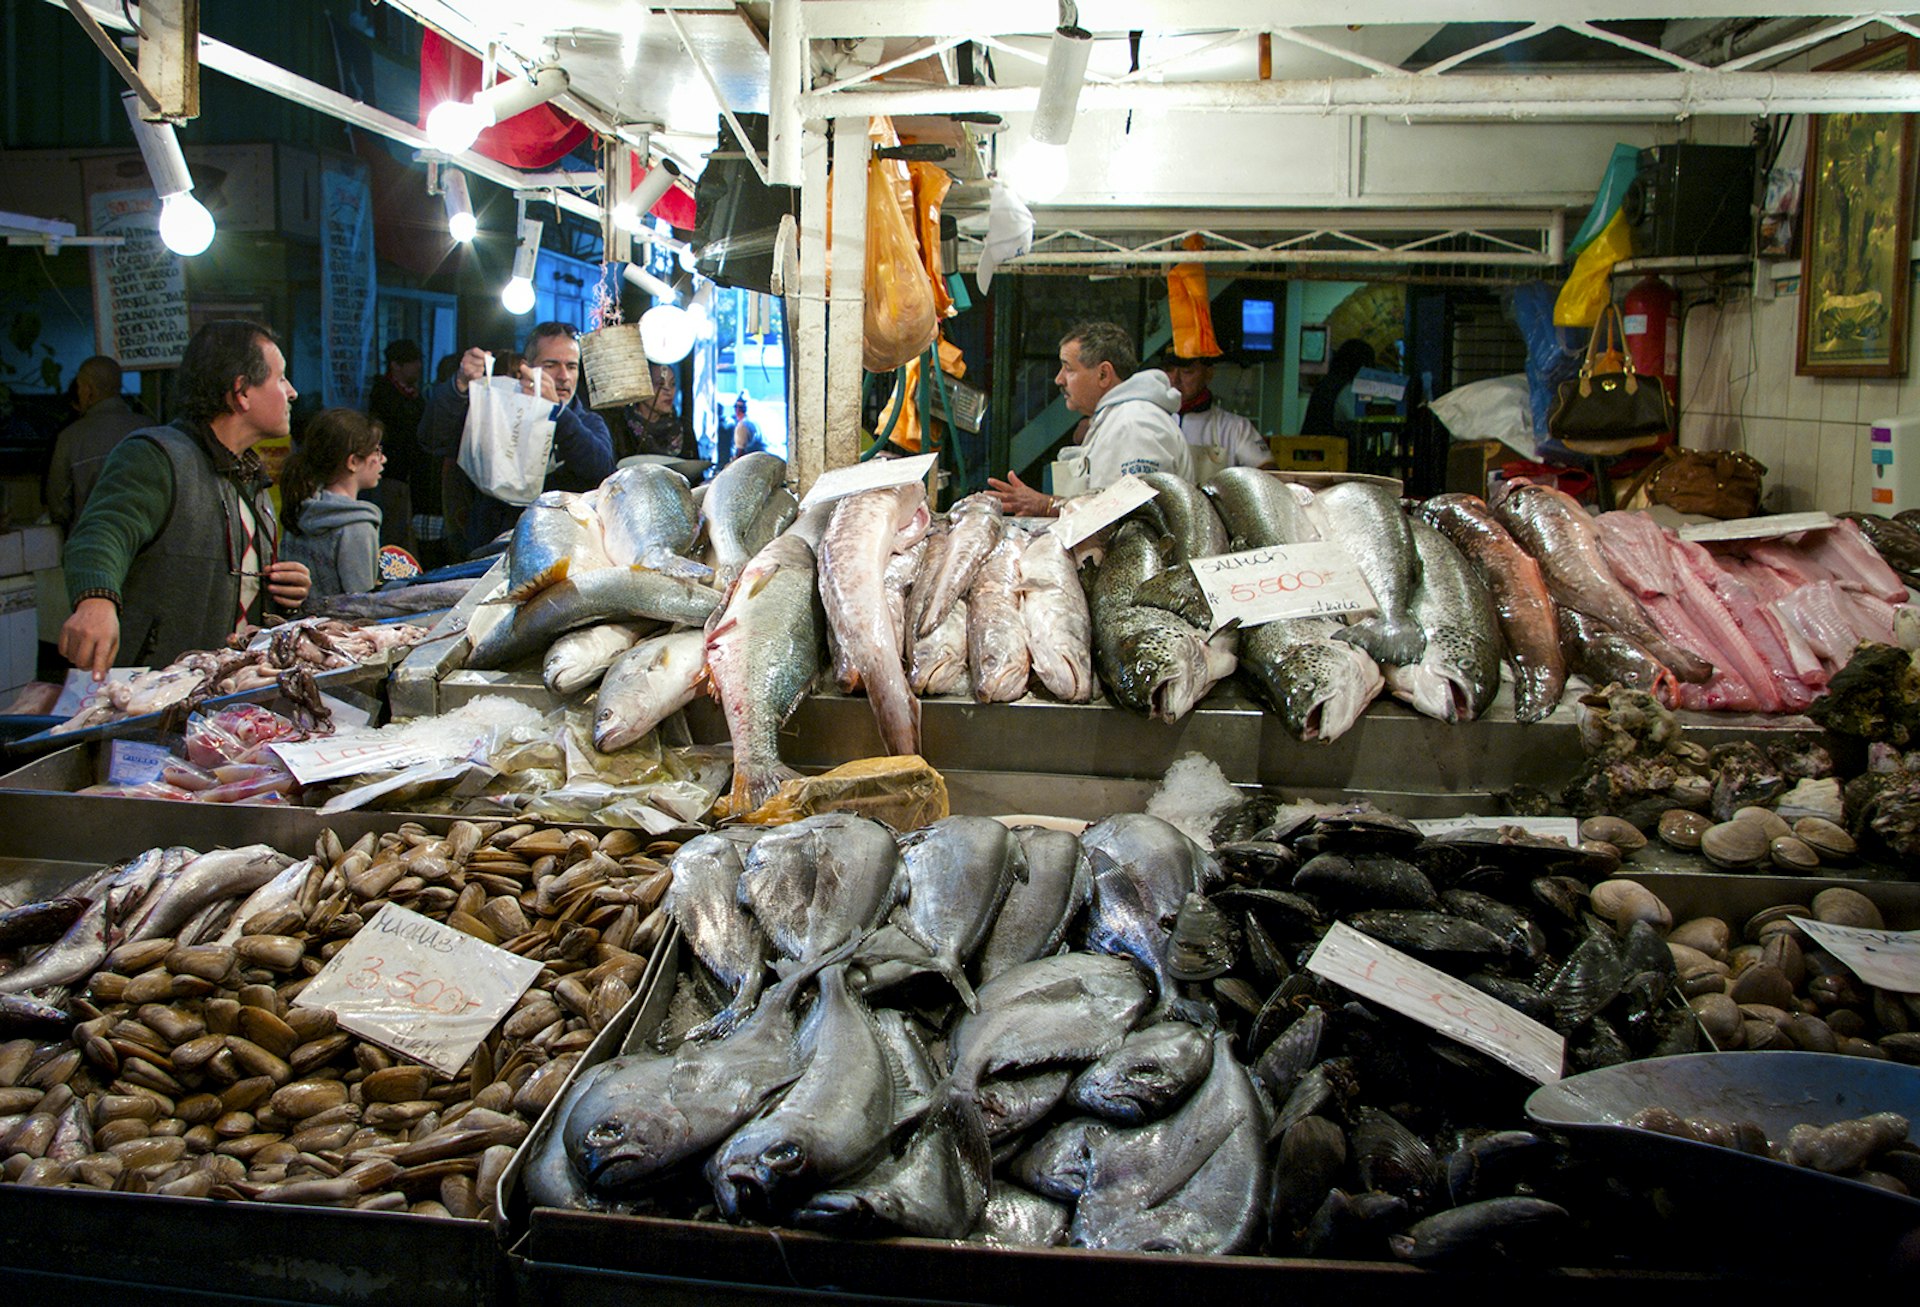 A seafood stall in Santiago's central market piled high with large fish and mollusks. Chile.